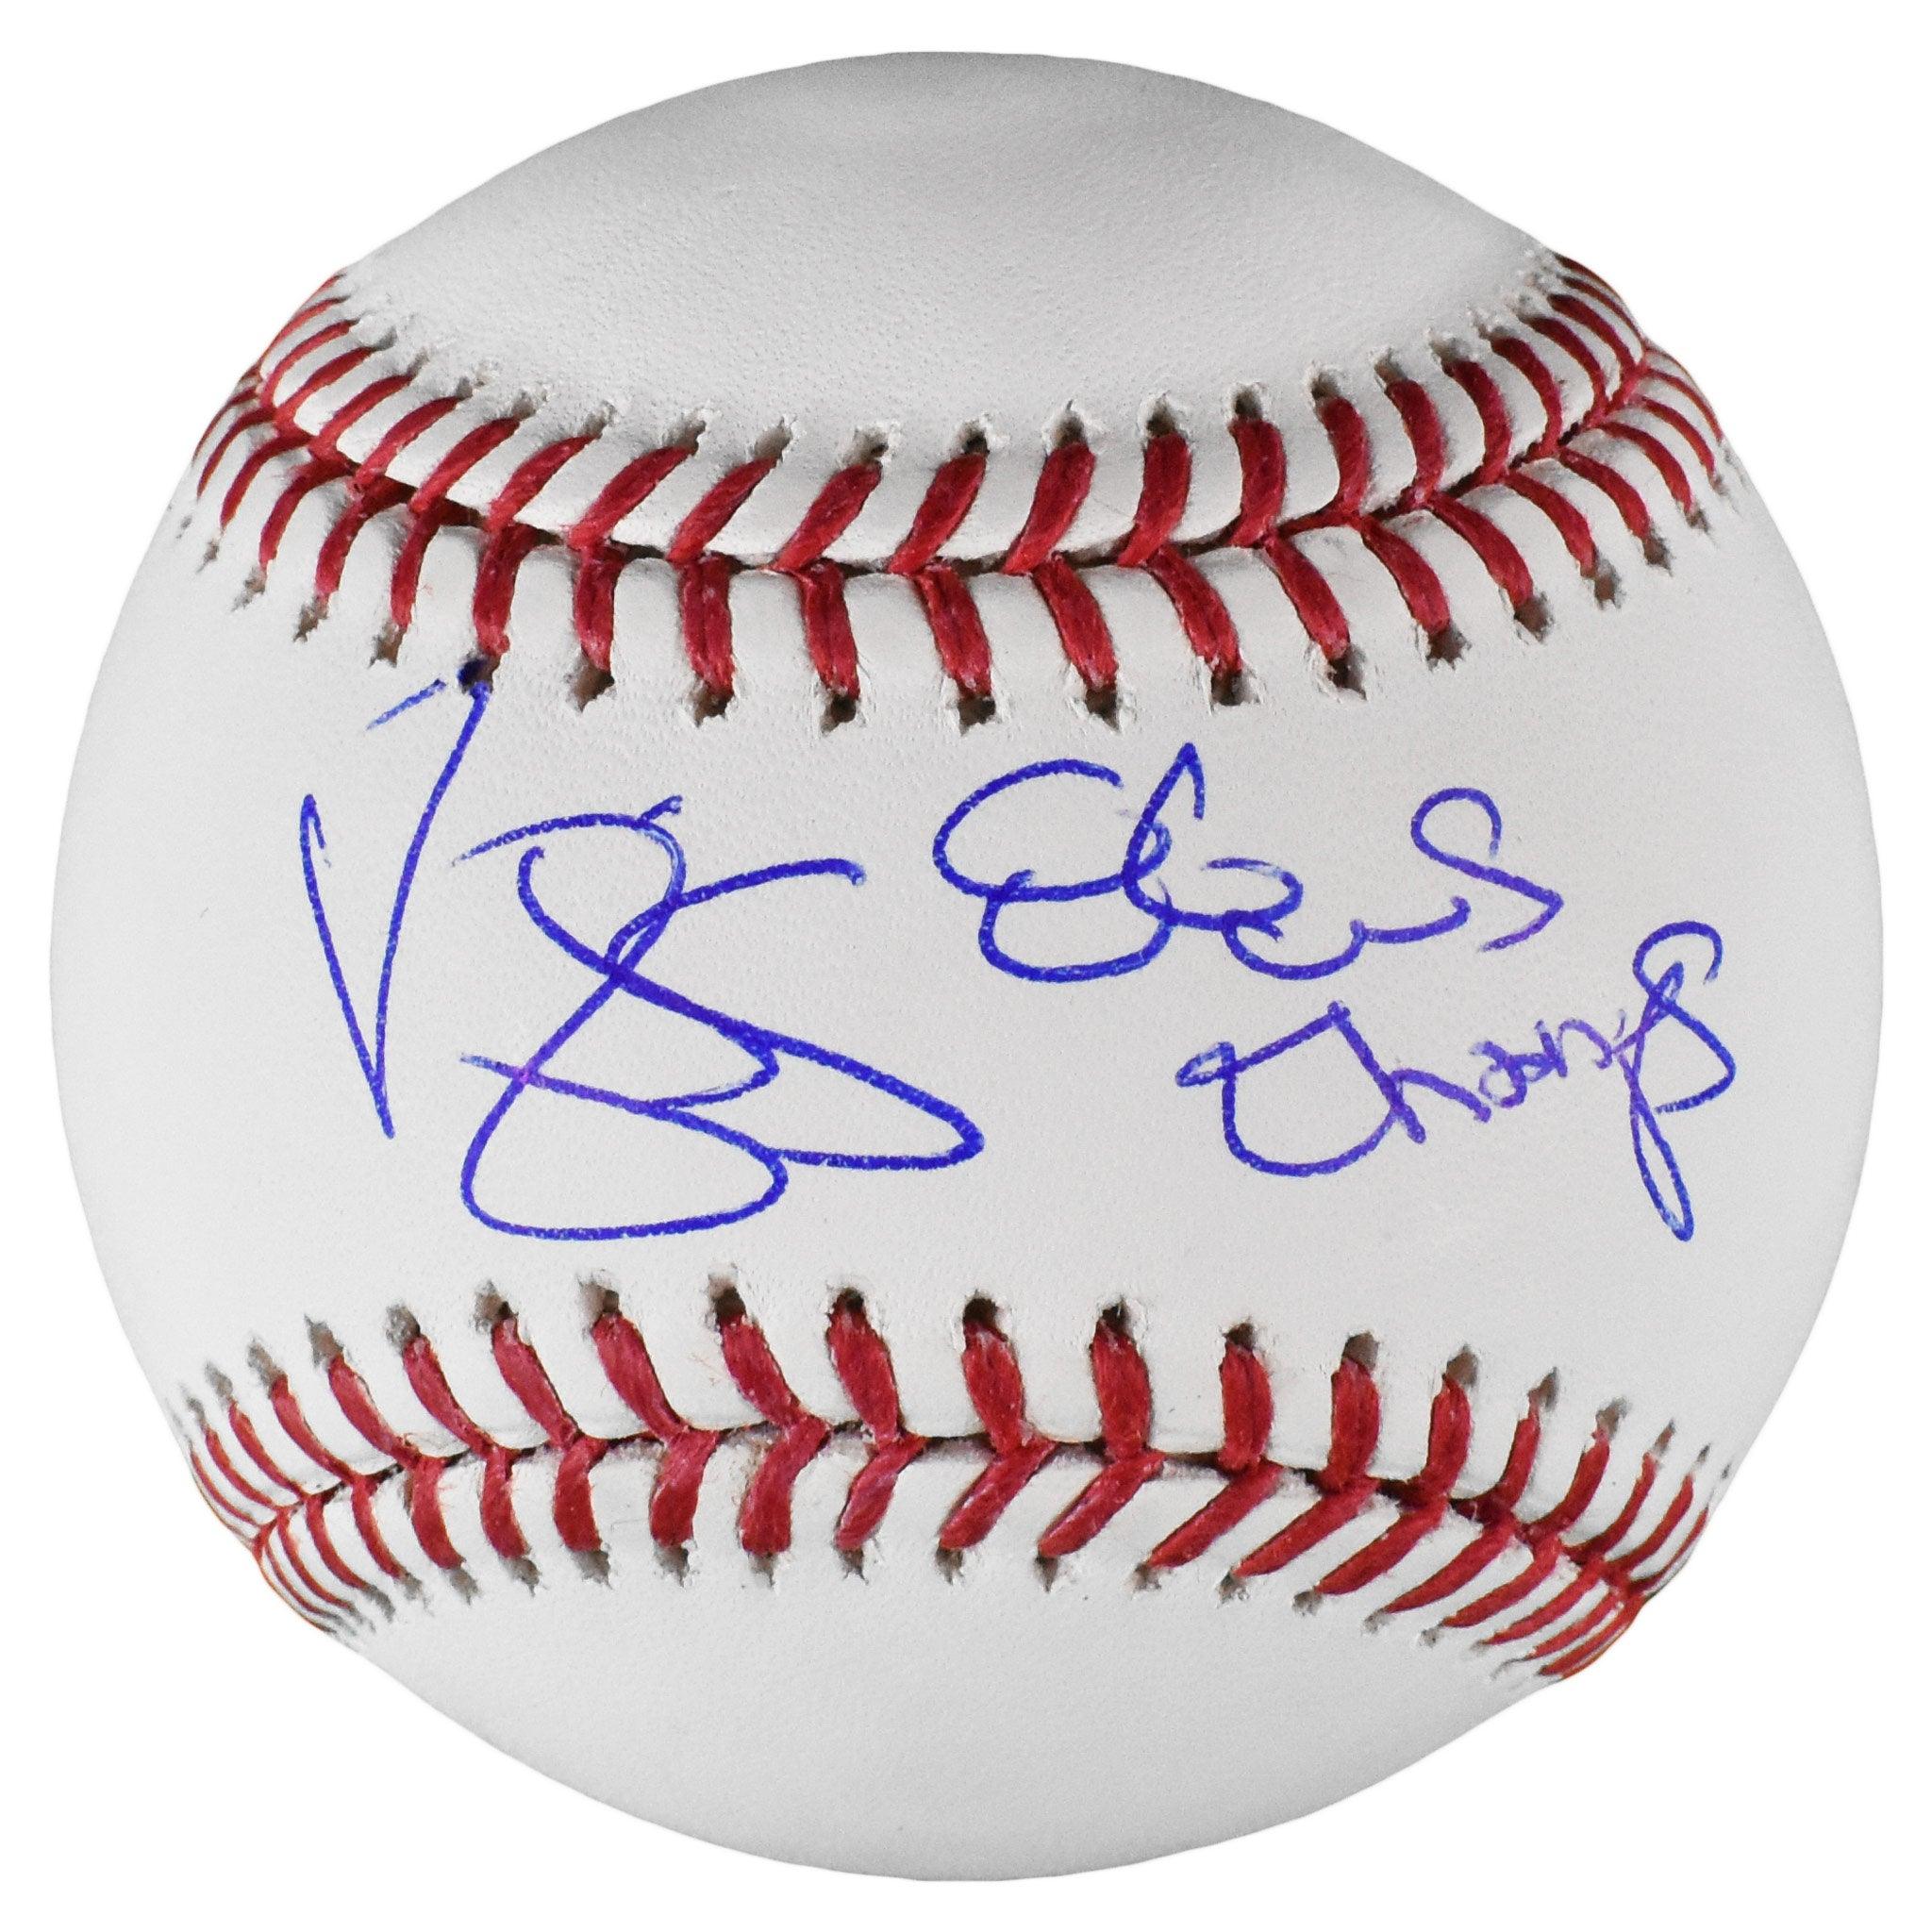 World Series MVP Autographed Baseballs - Who is Most Valuable? Top 10